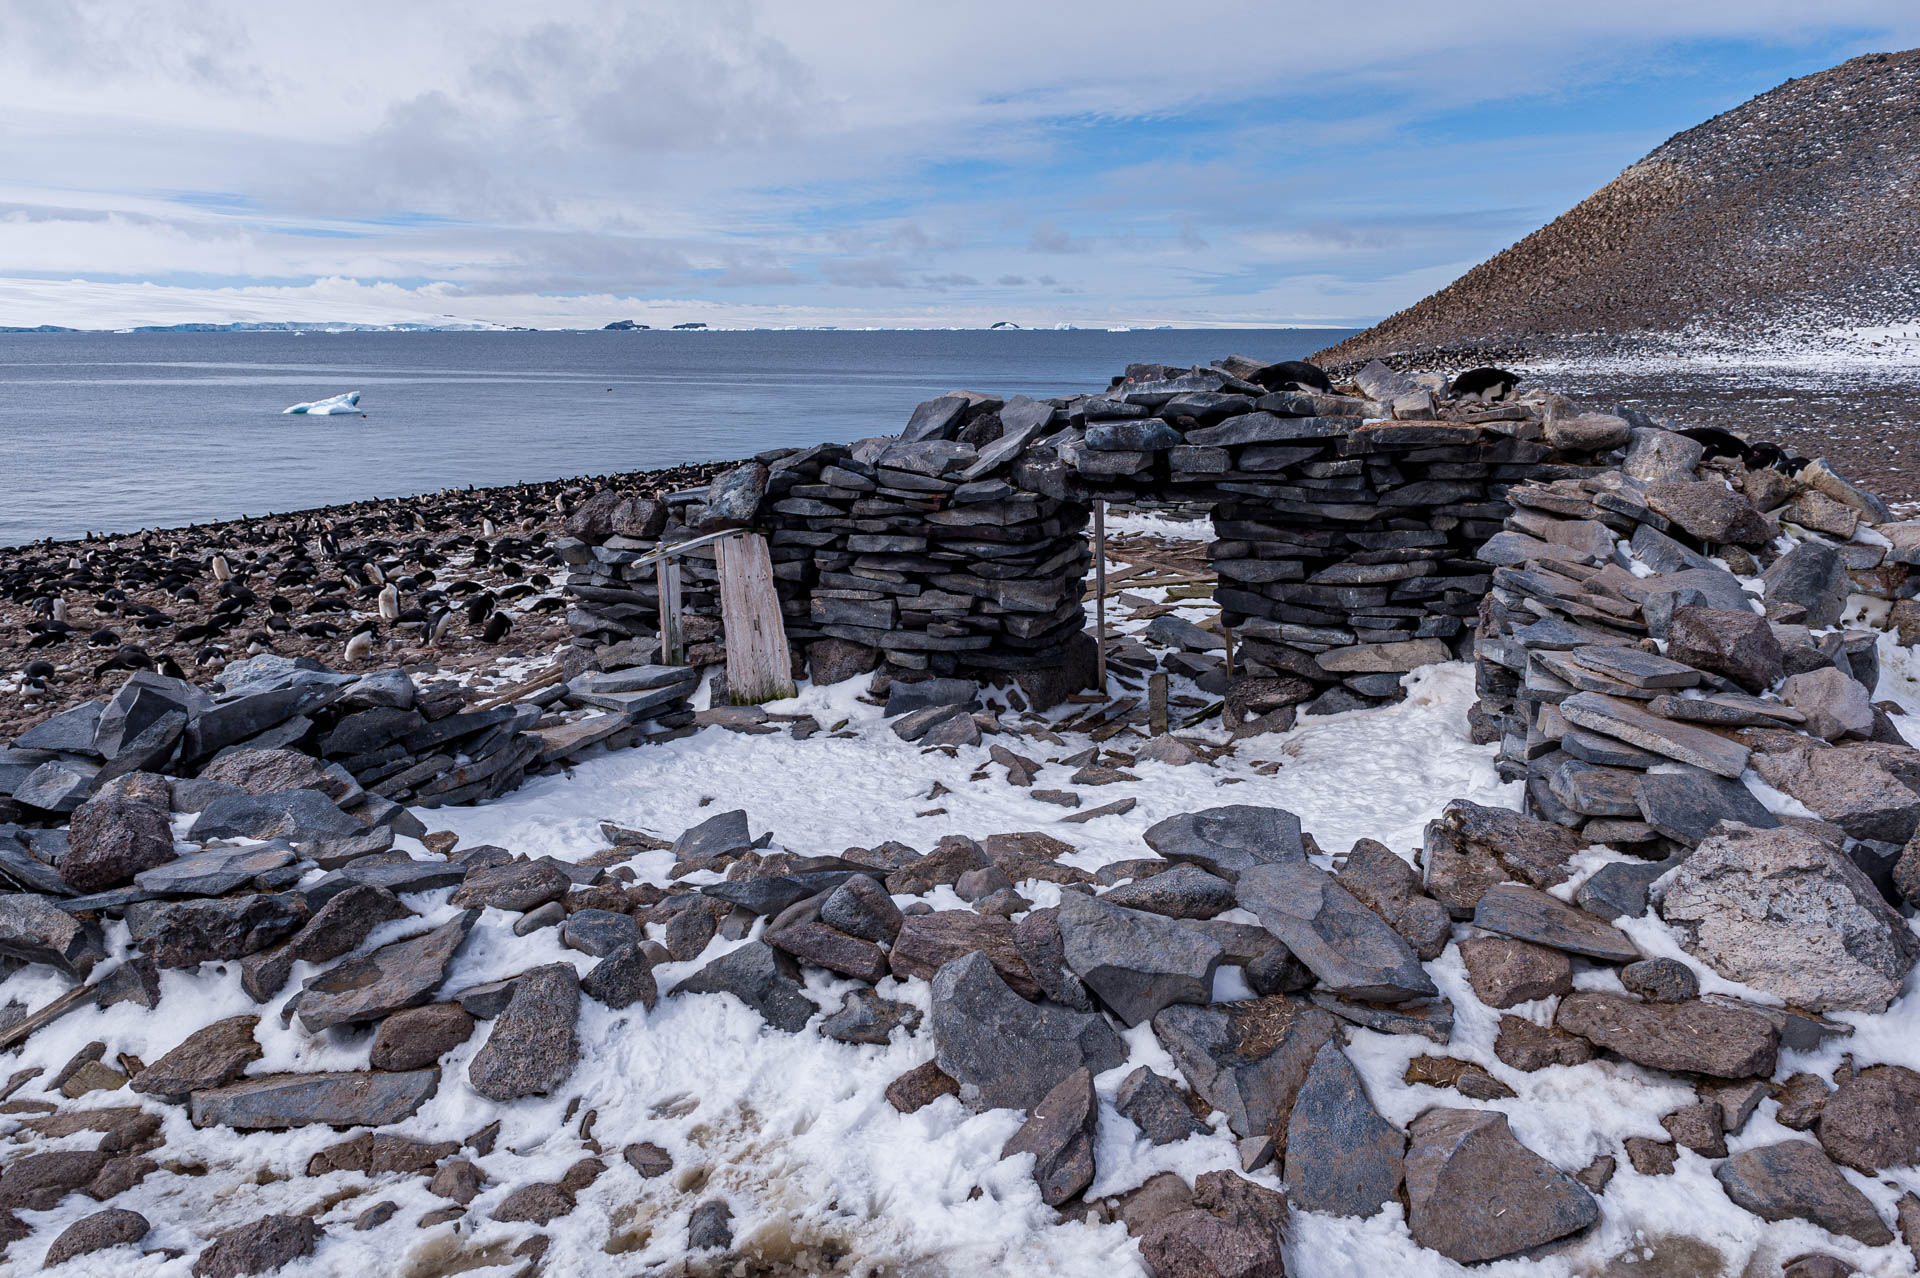 Remains of a winter hut from the Nordenskjeld expedition.